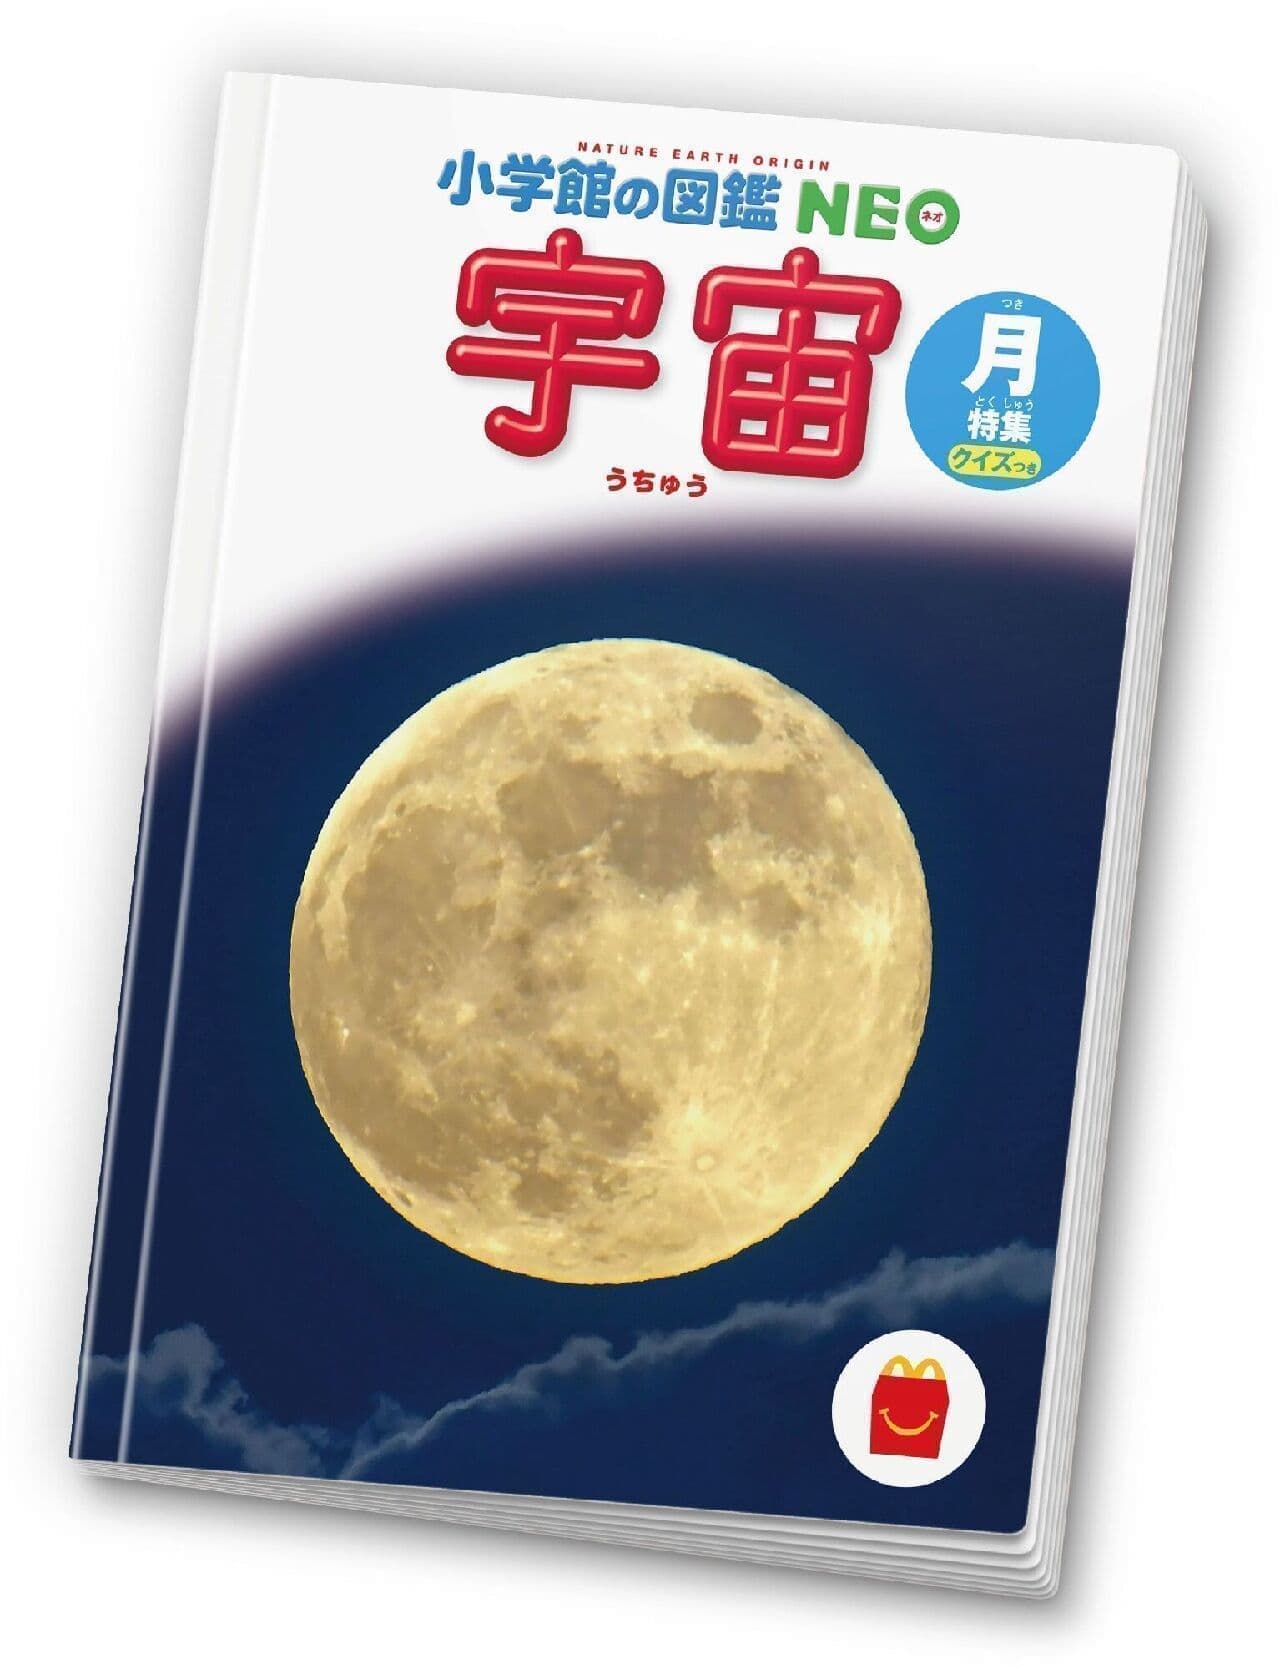 McDonald's Just a Happy Set Mini-Illustrated Book "Space/Moon Special with Quiz"